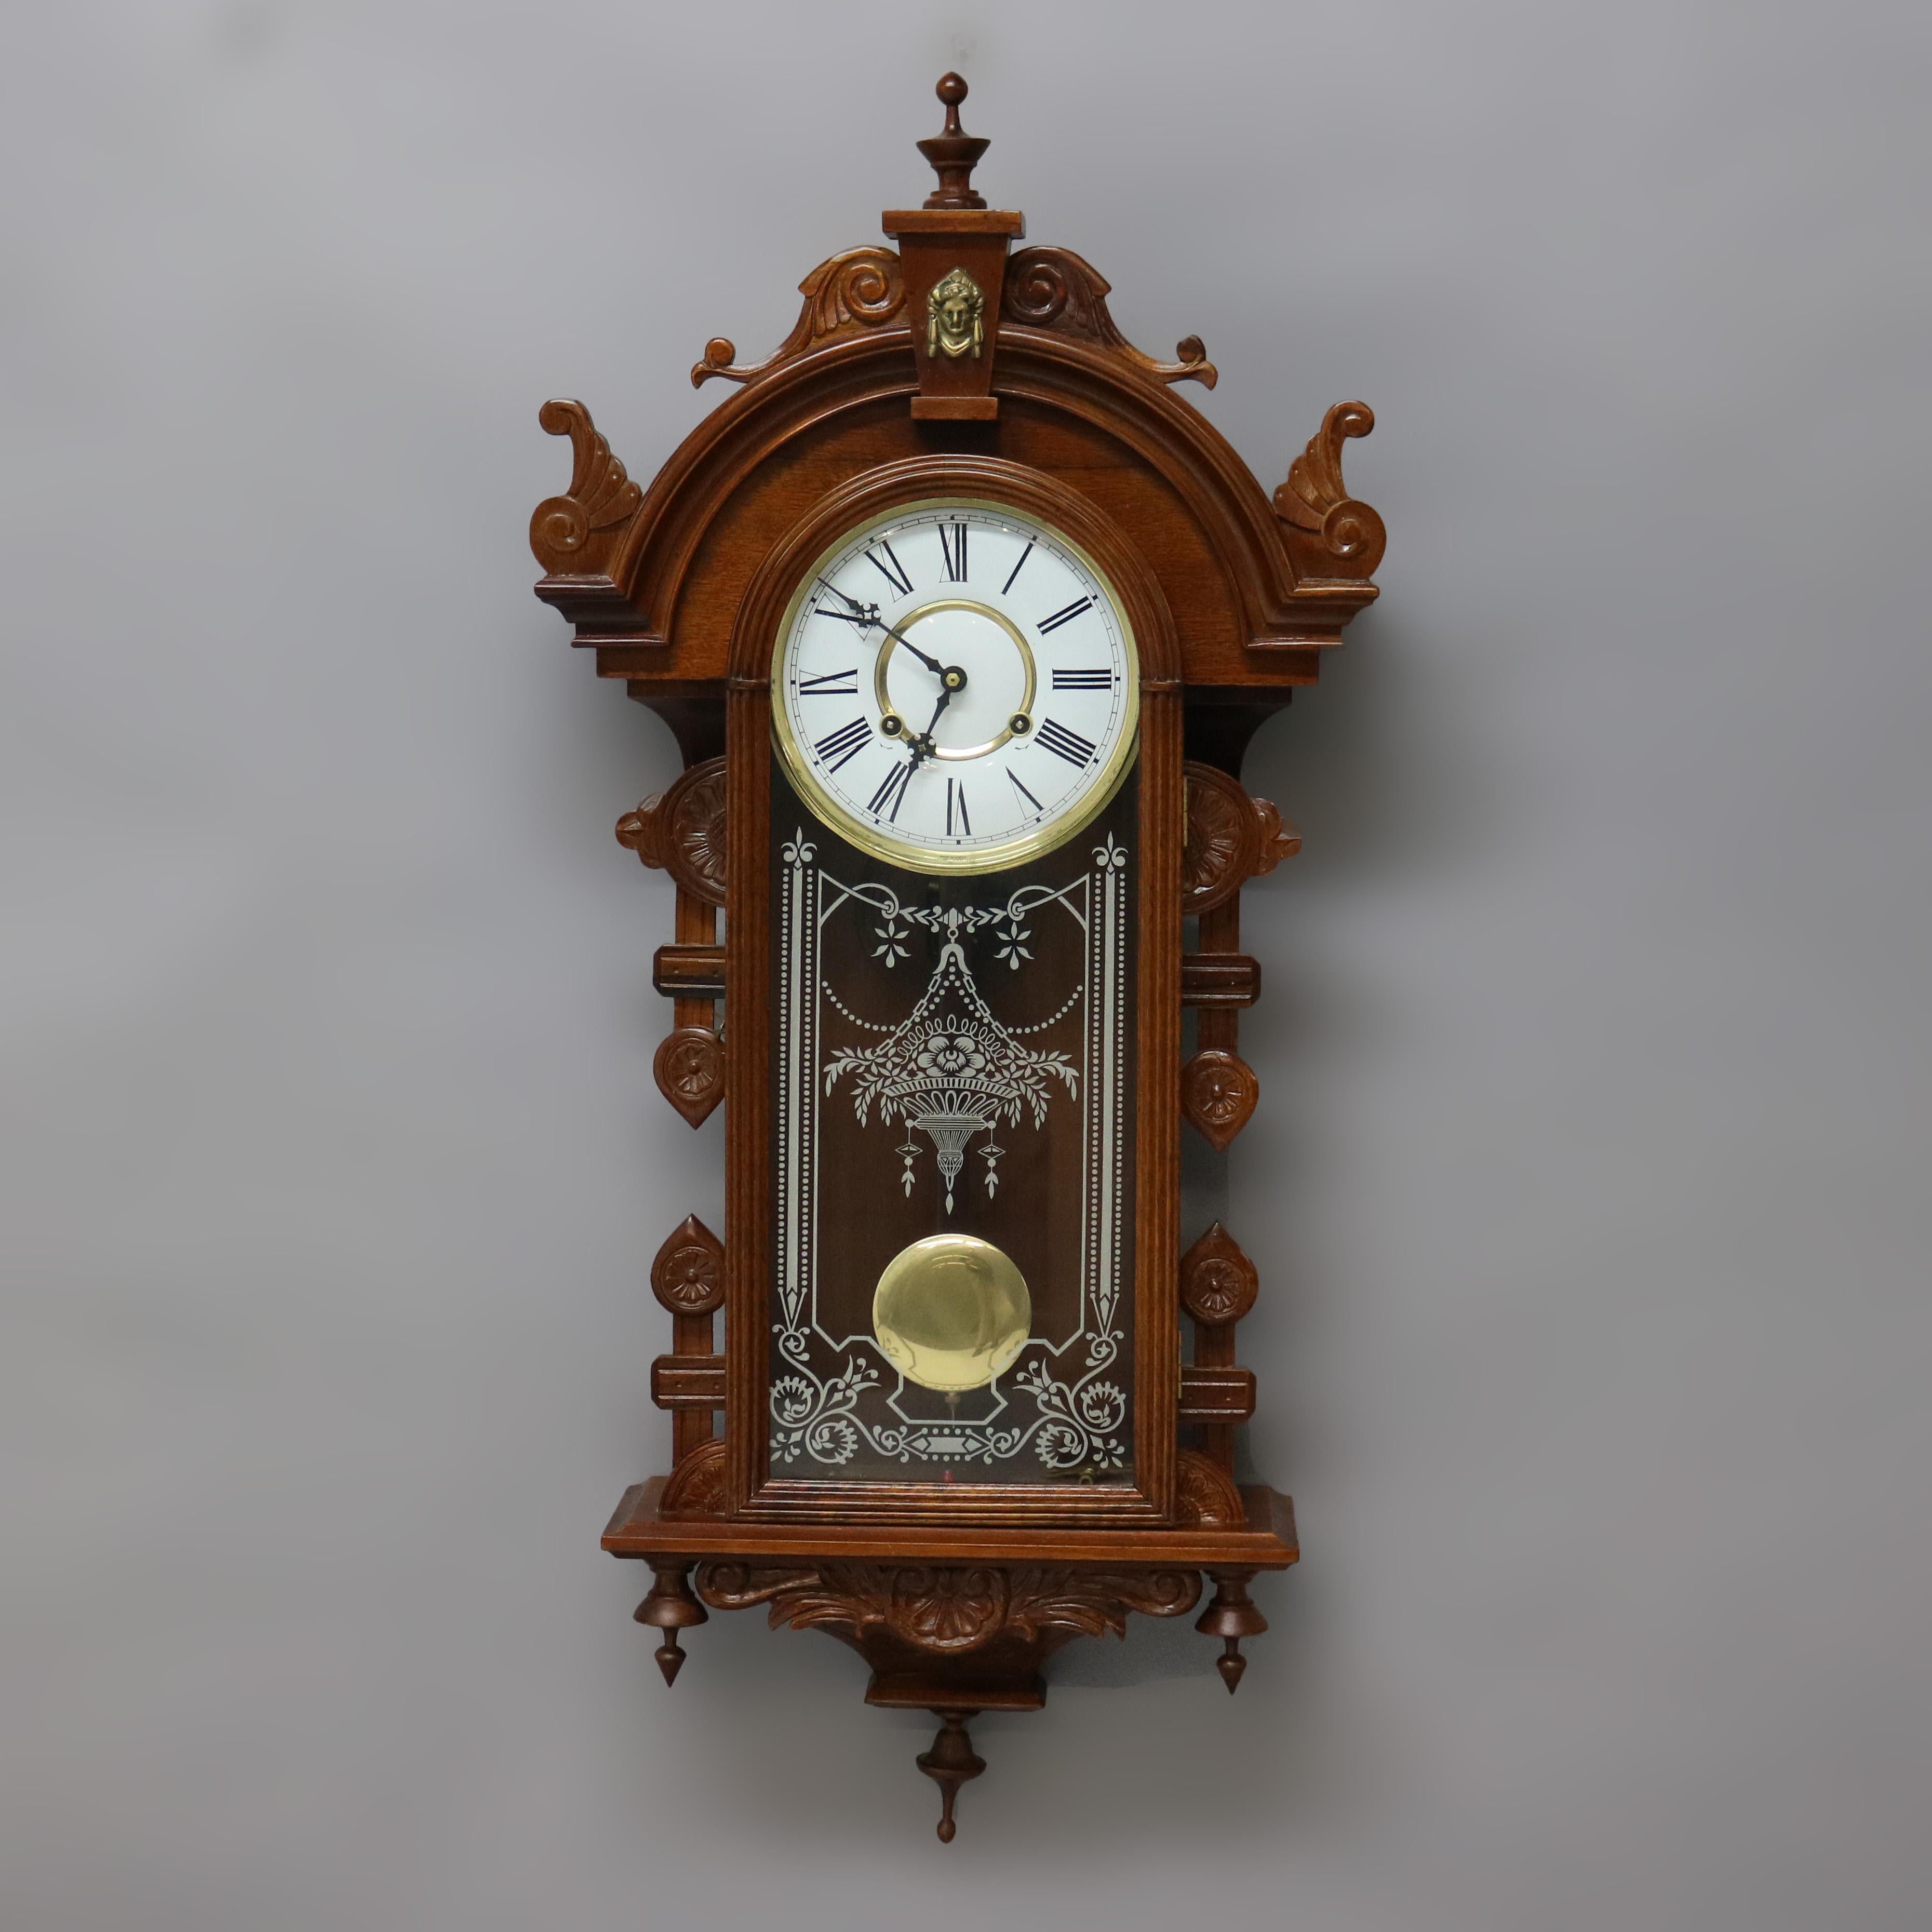 A Victorian style wall clock offers mahogany case with arched crest having scroll work and finials with central female mask over case with glass door, scrolls and finials throughout, 20th century

Measures- 38.25''H x 18.25''W x 5.5''D.